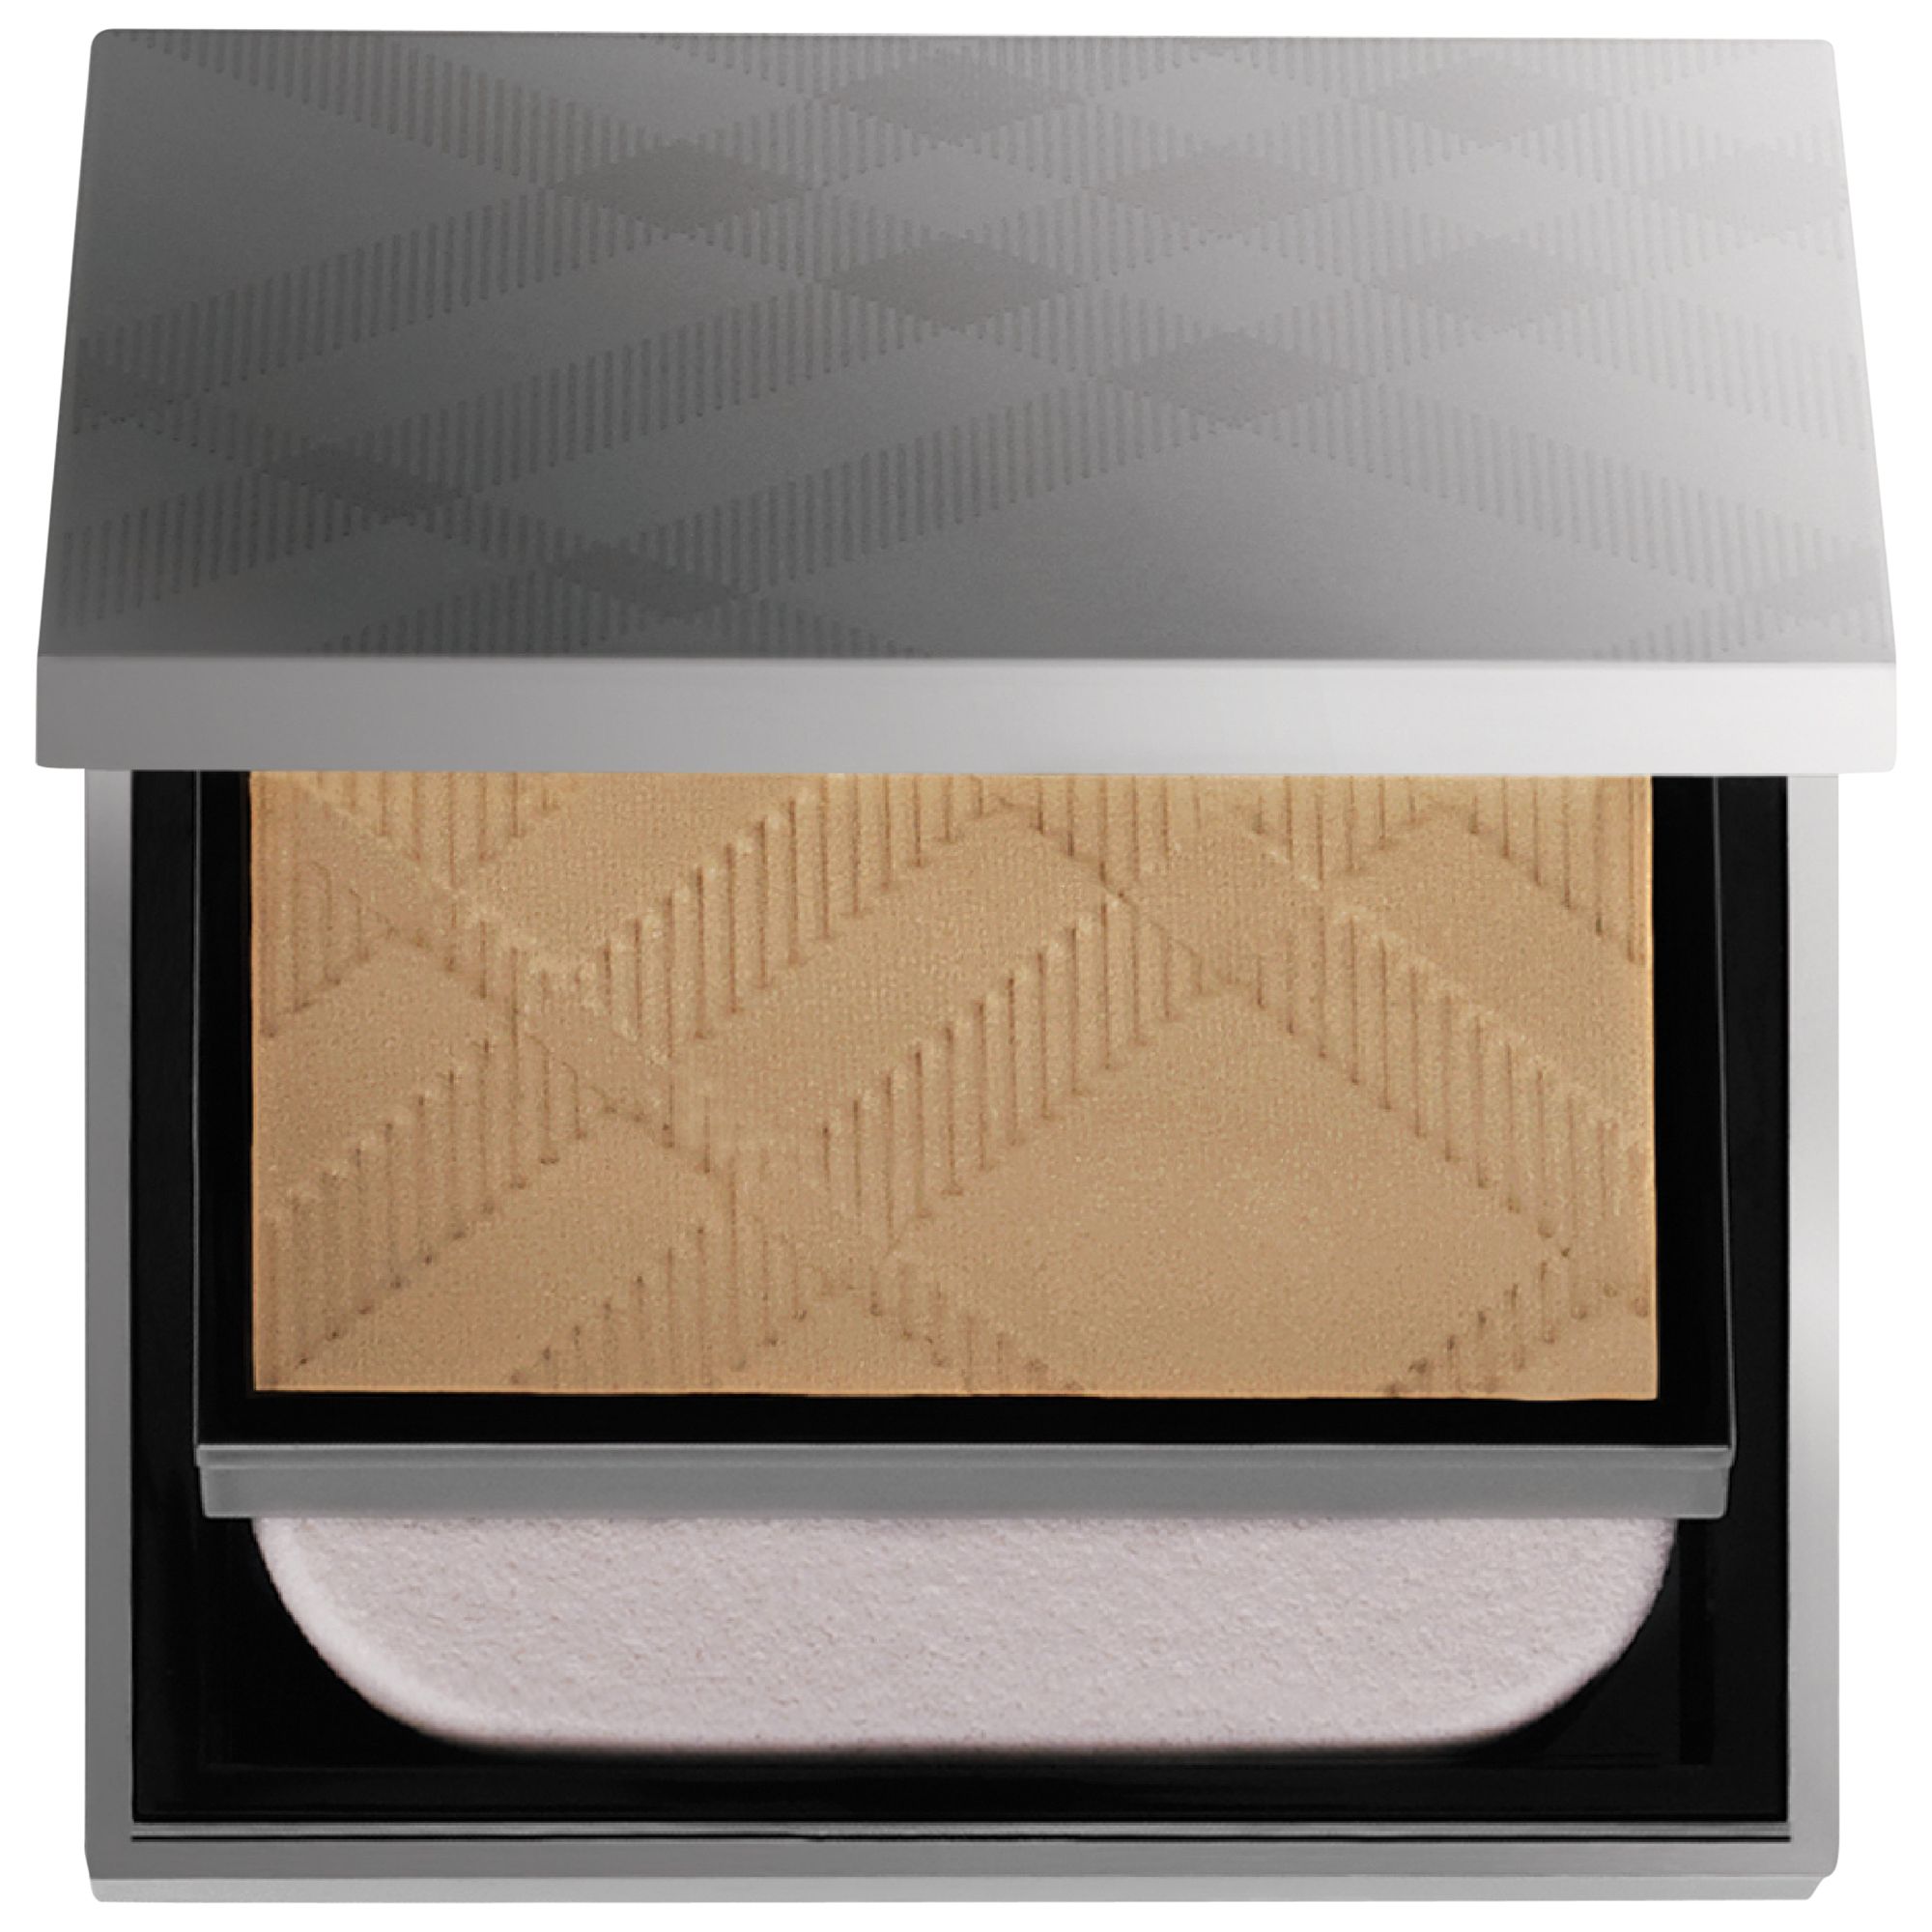 shop for Burberry Beauty Sheer Foundation - Luminous Compact Foundation at Shopo